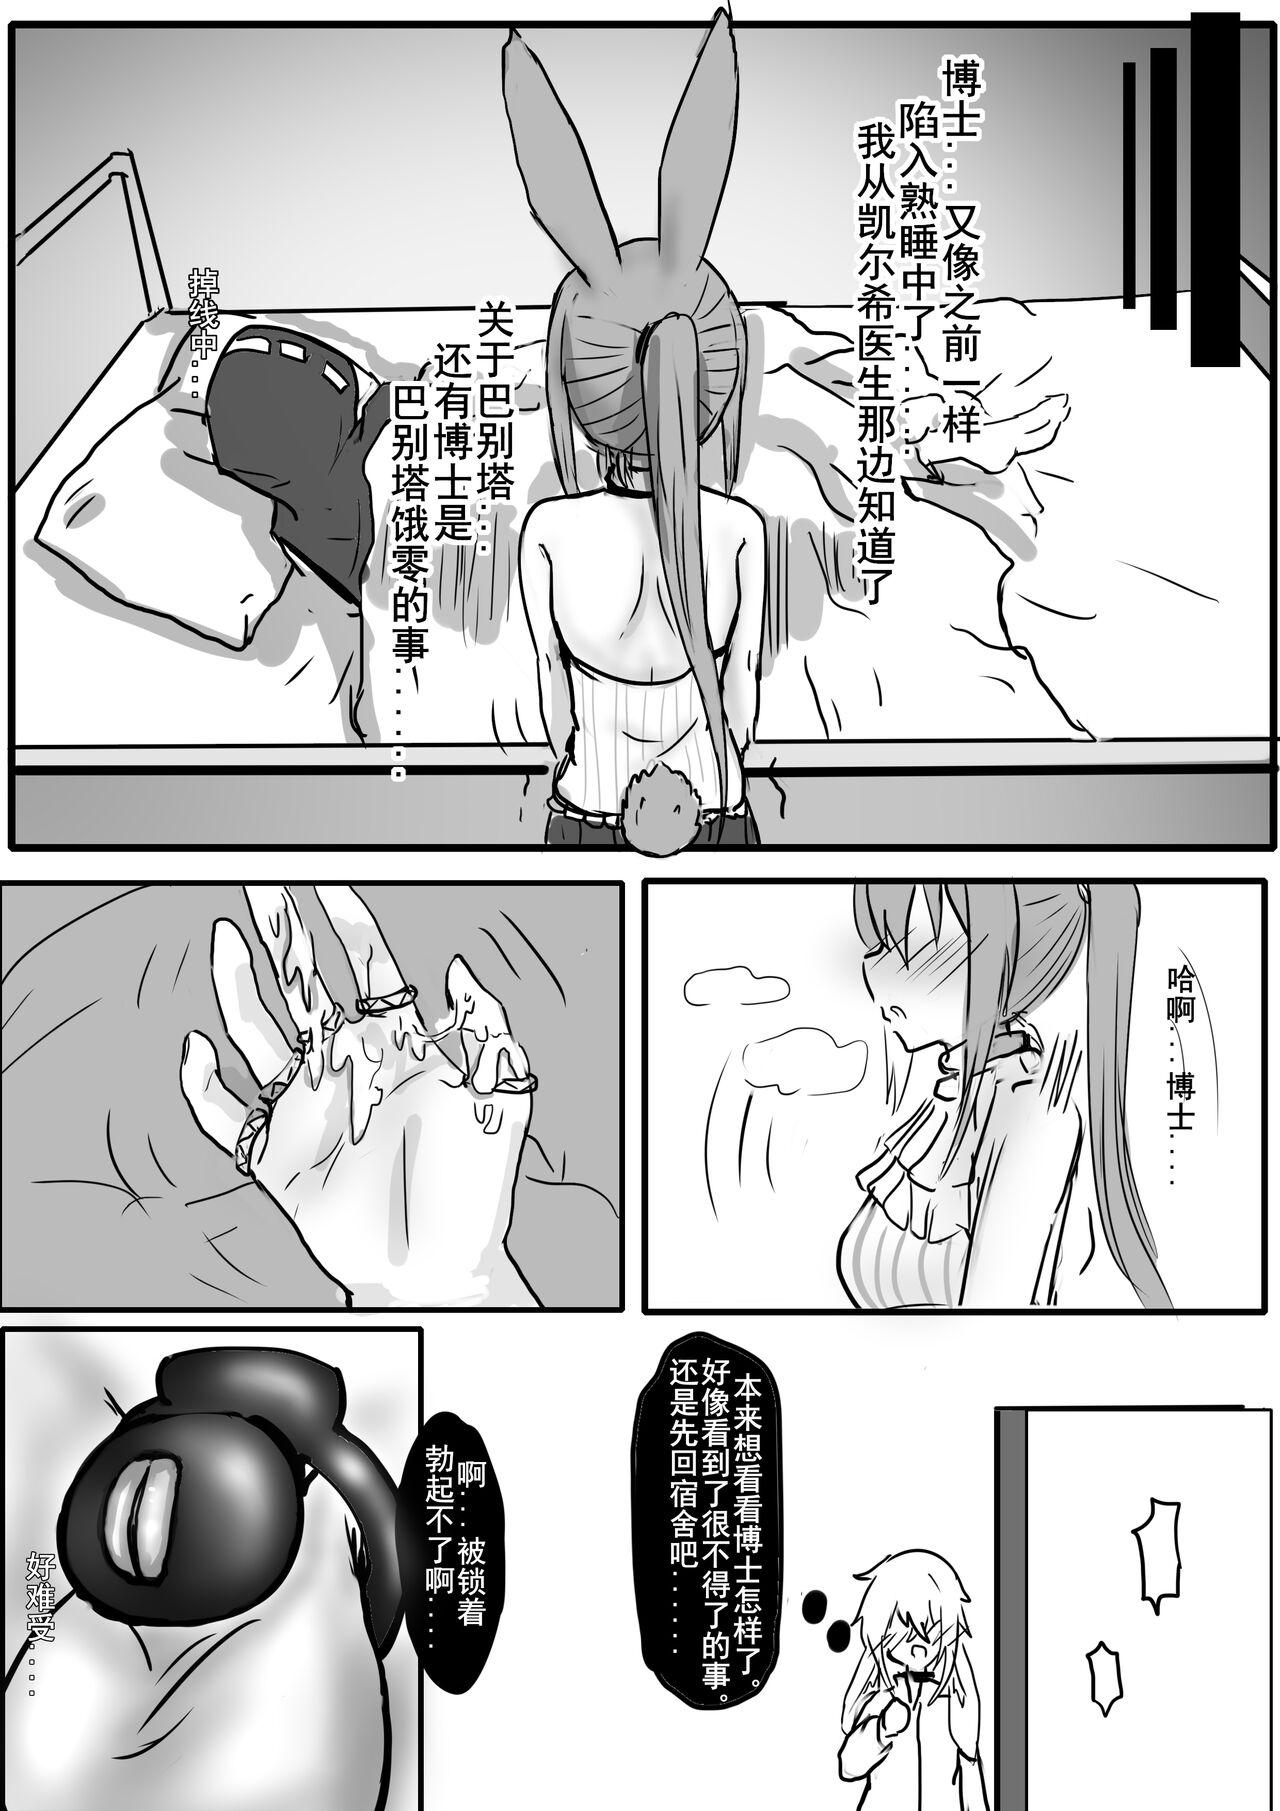 Jap Special services of Ansel Ⅲ - Arknights Chastity - Page 6